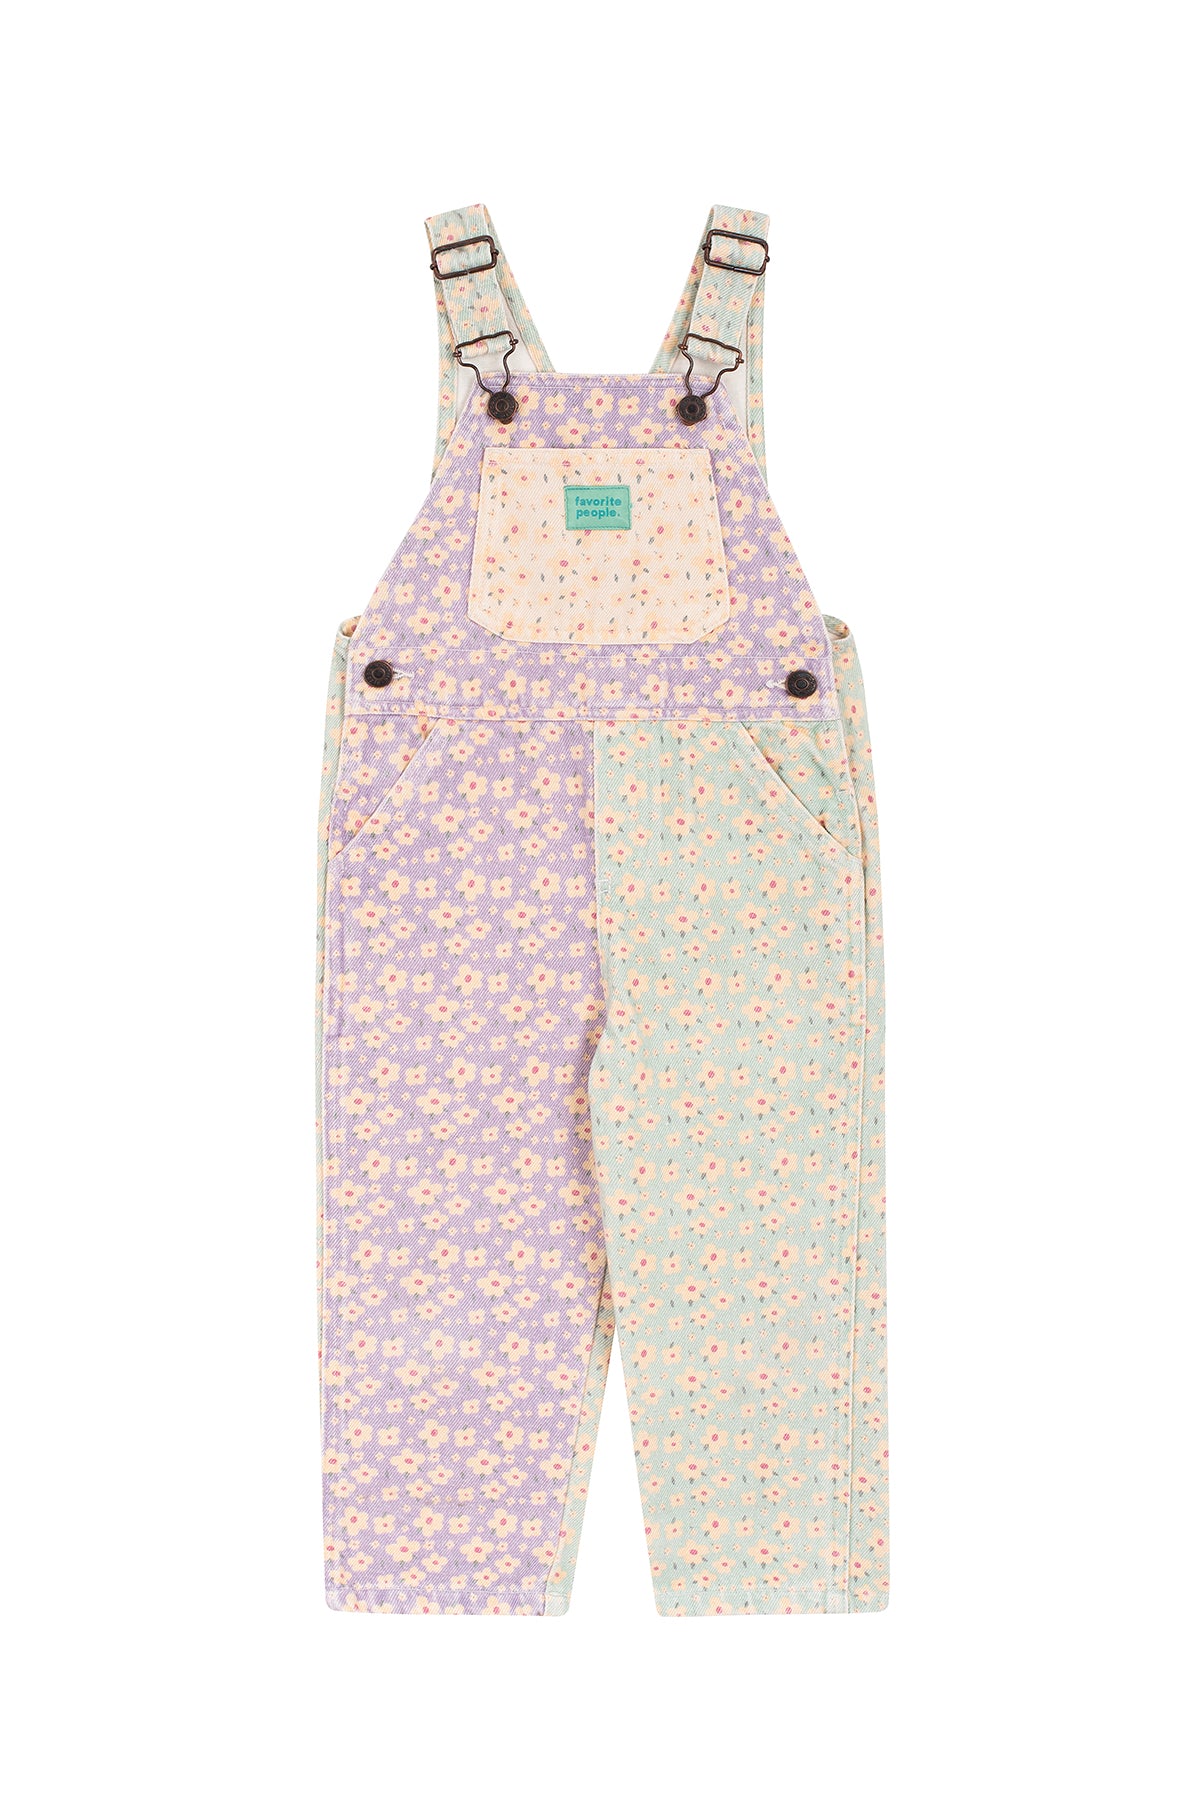 Find the coolest overalls in the world! Shop at Favorite People Store